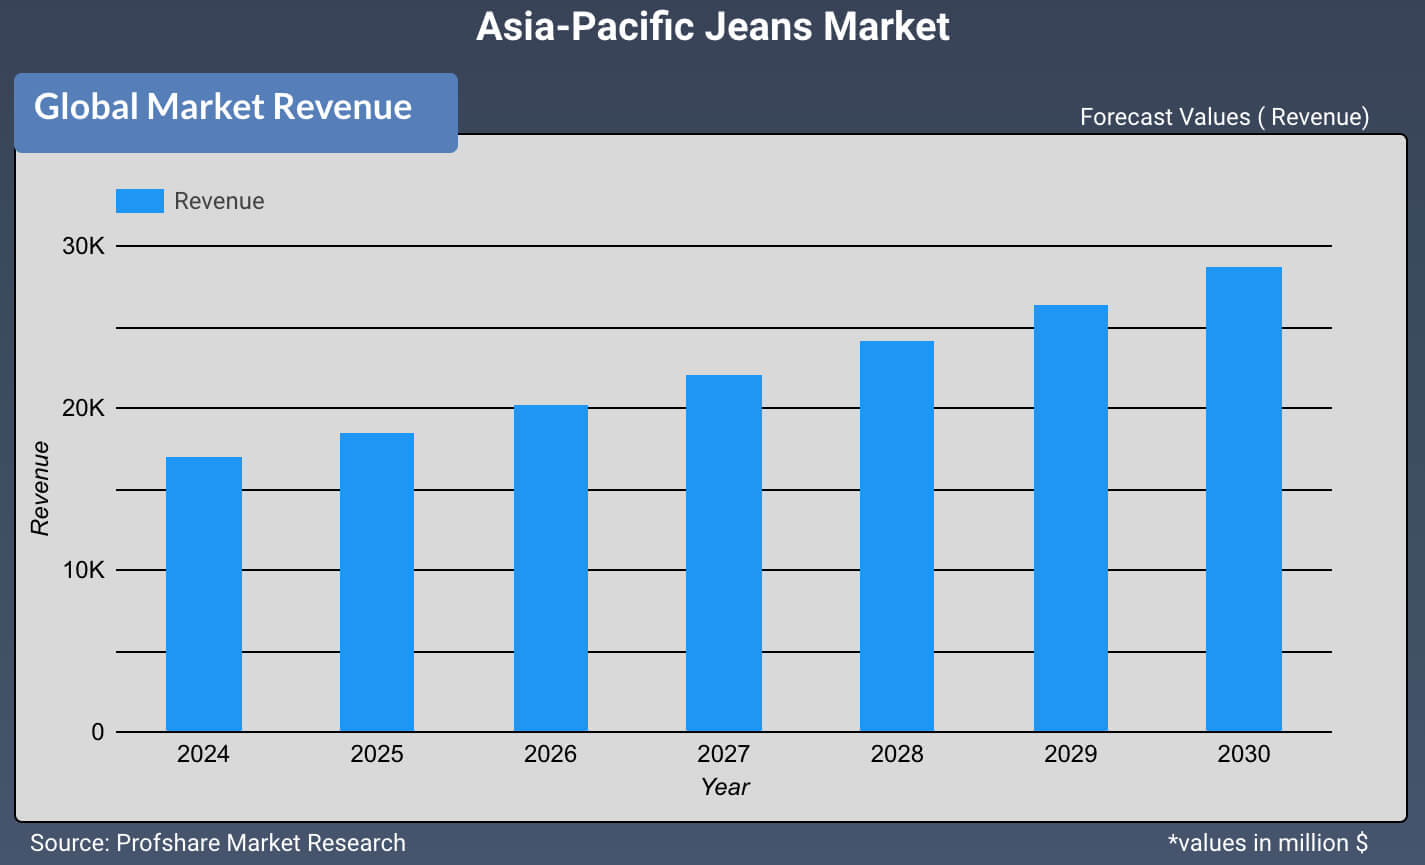 Asia-Pacific Jeans Market